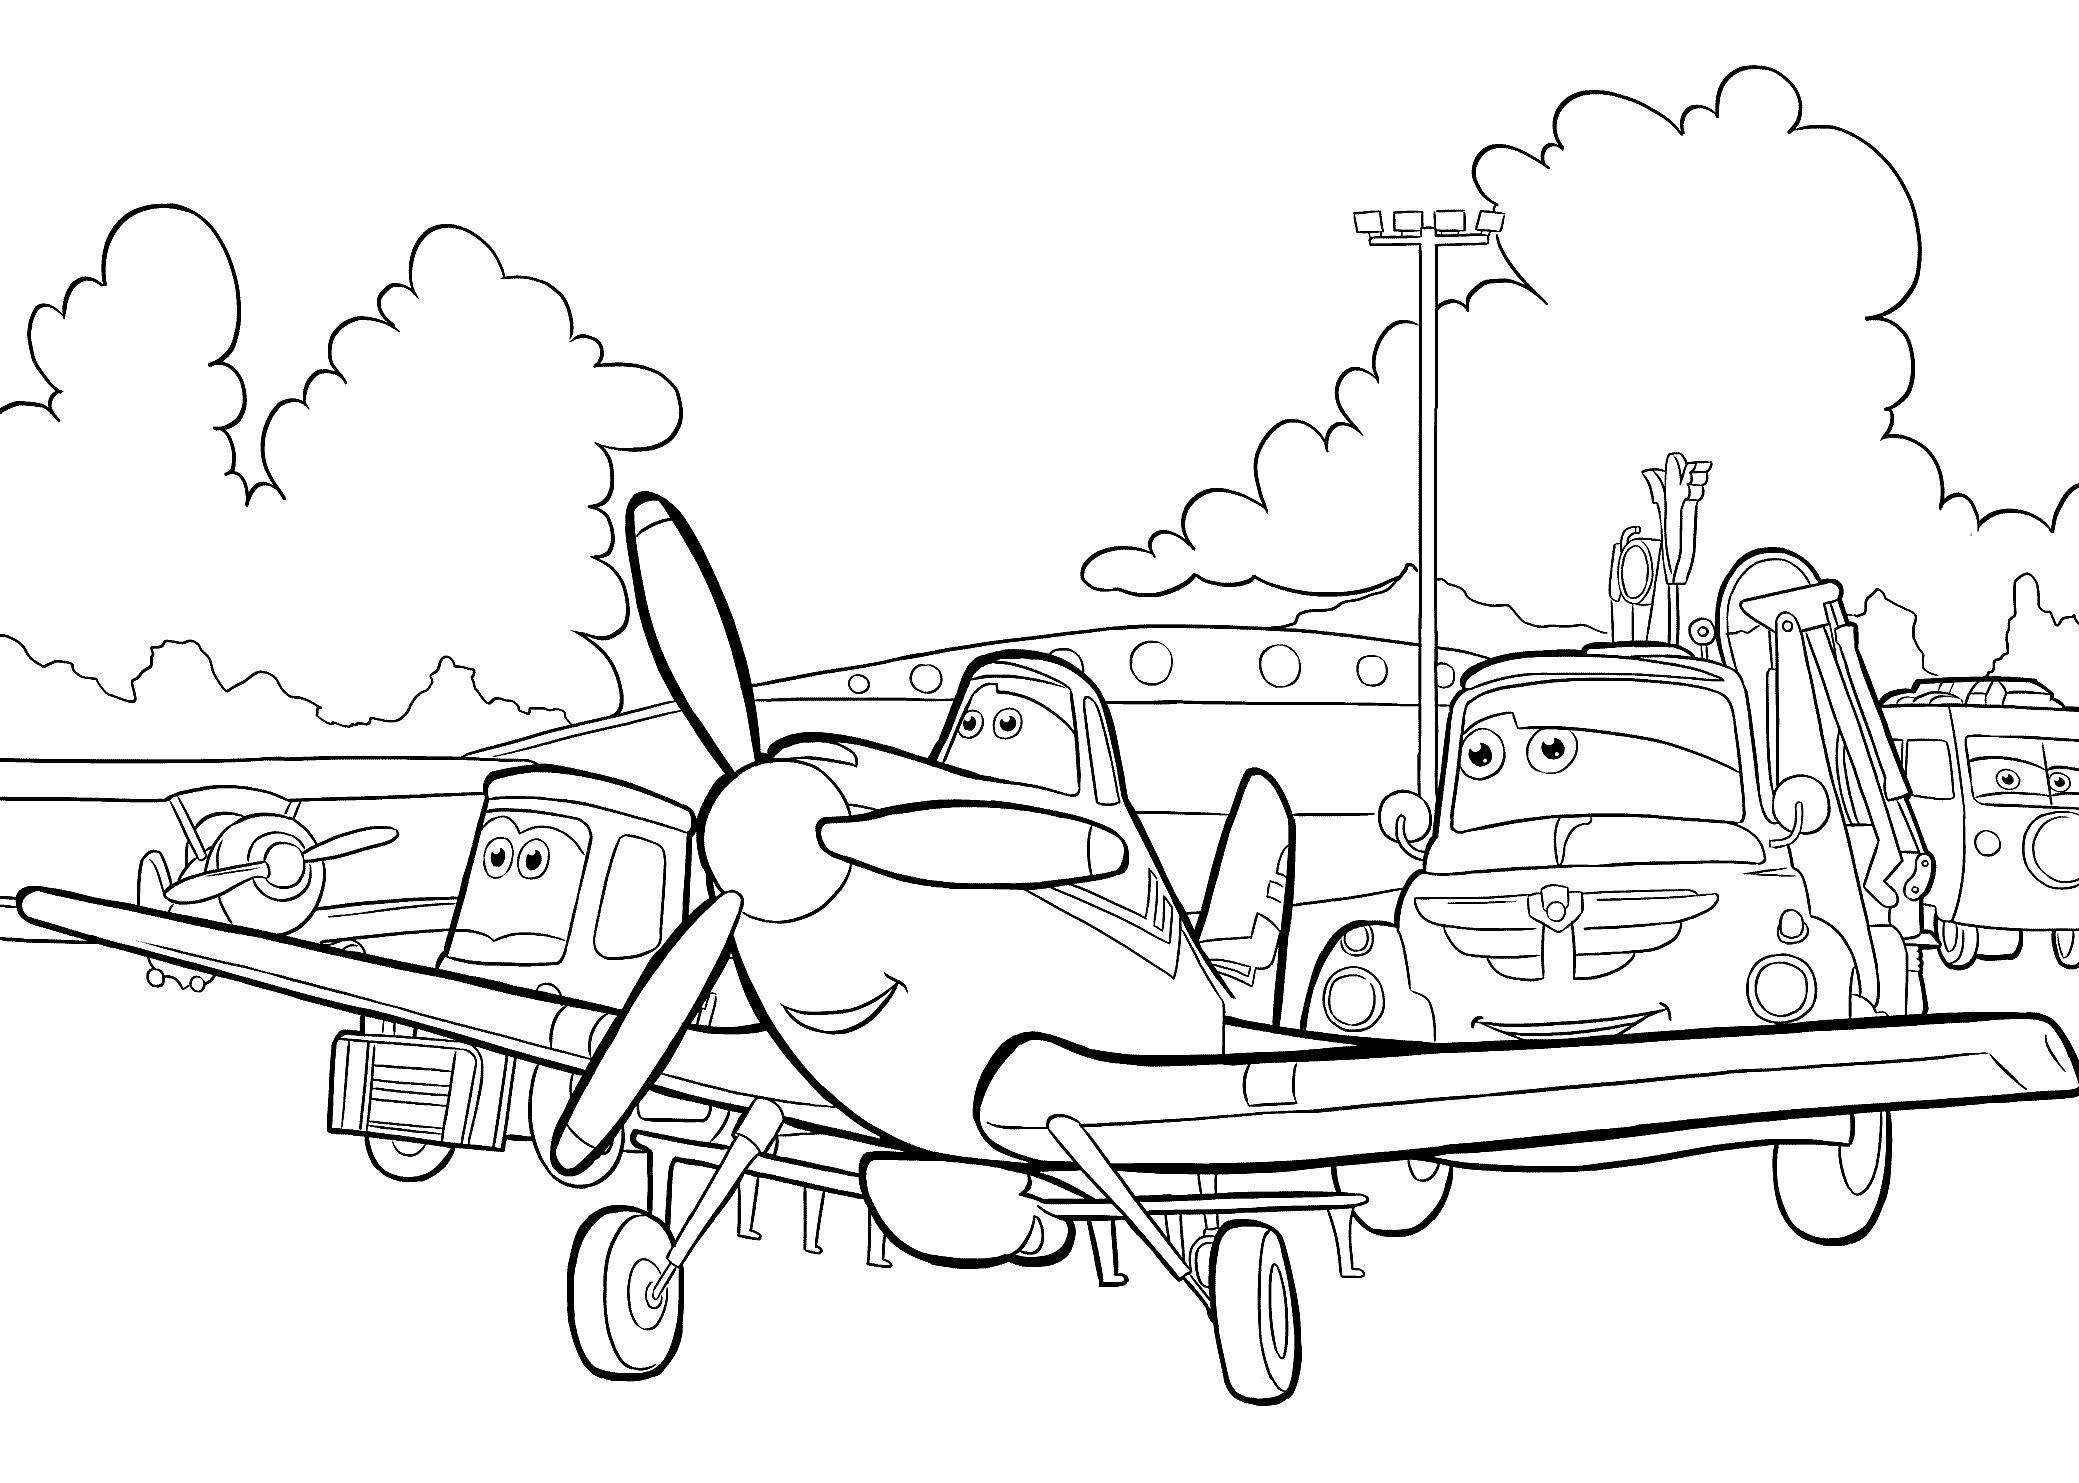 Plane dusty with friends coloring pages for kids printable free coloring pages cartoon coloring pages free coloring pages